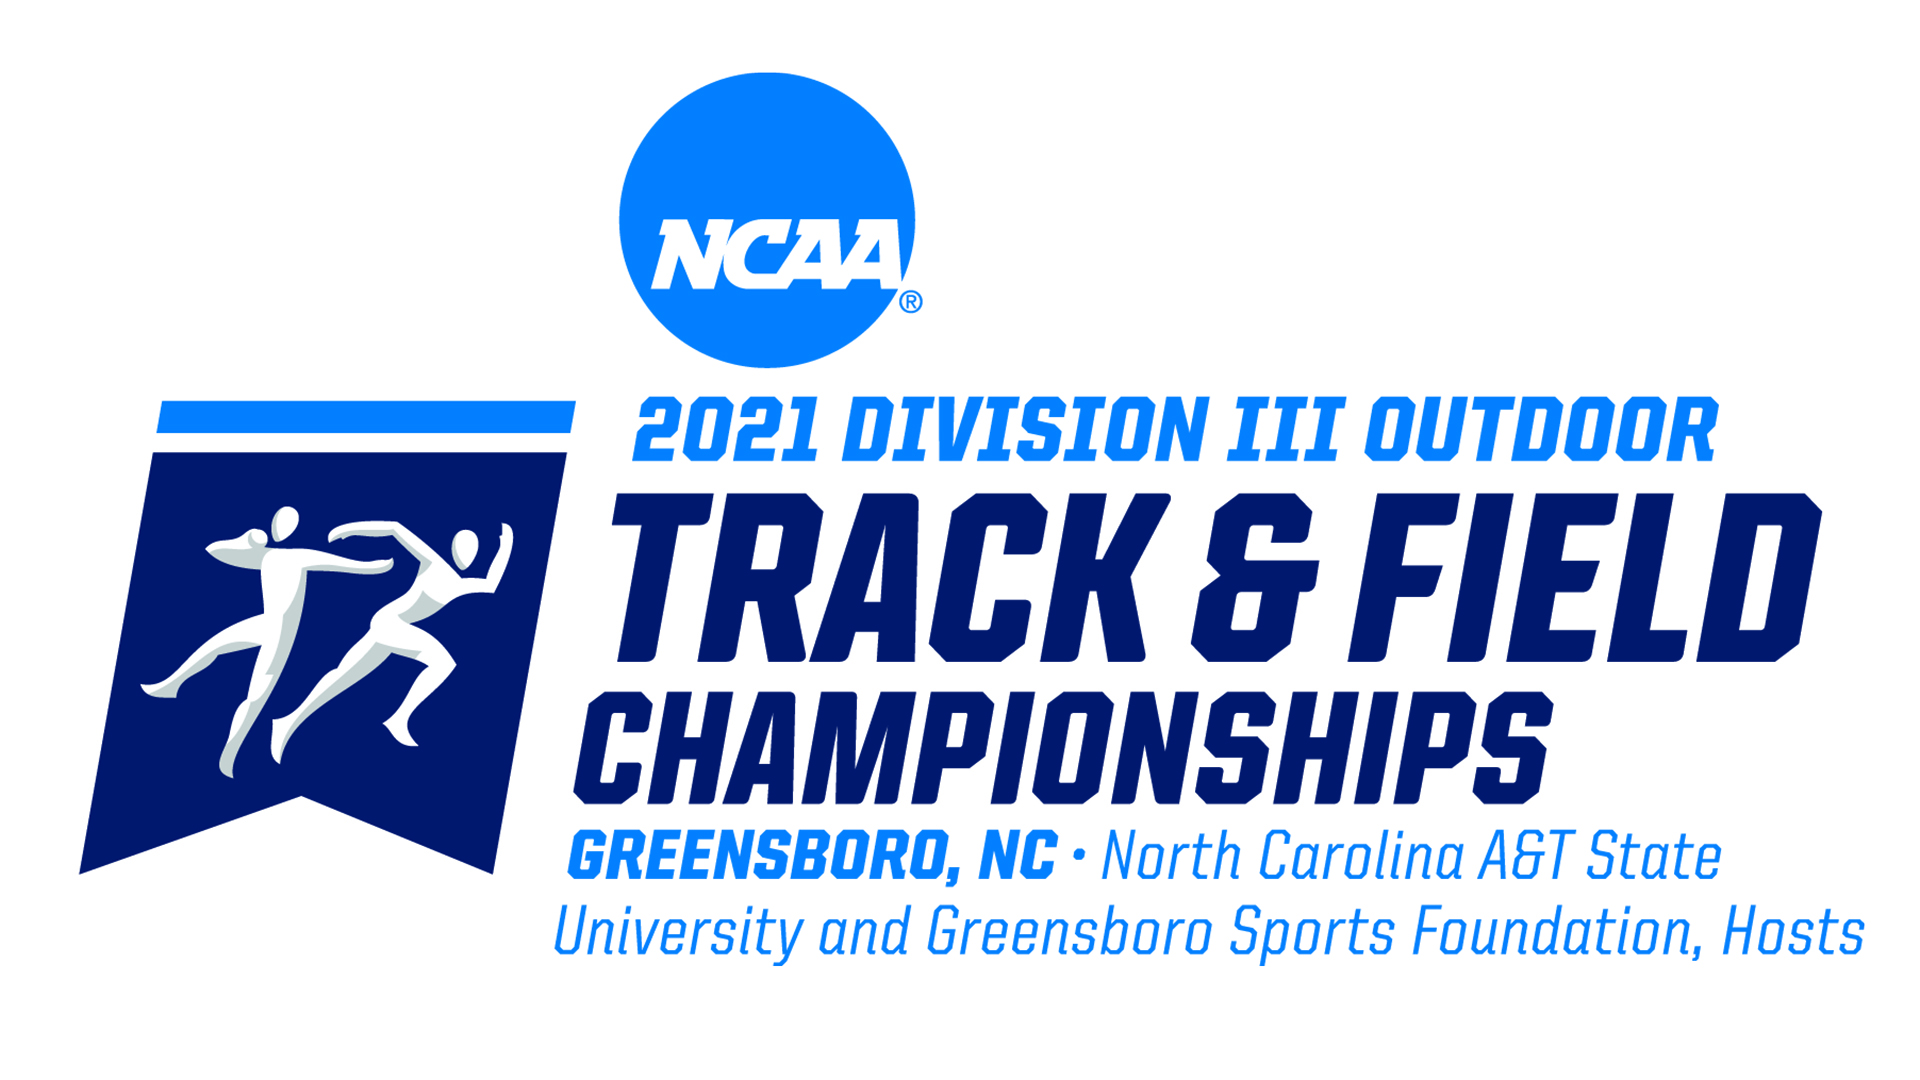 10 Women, 5 Men Qualify for NCAA Outdoor Track & Field Championships